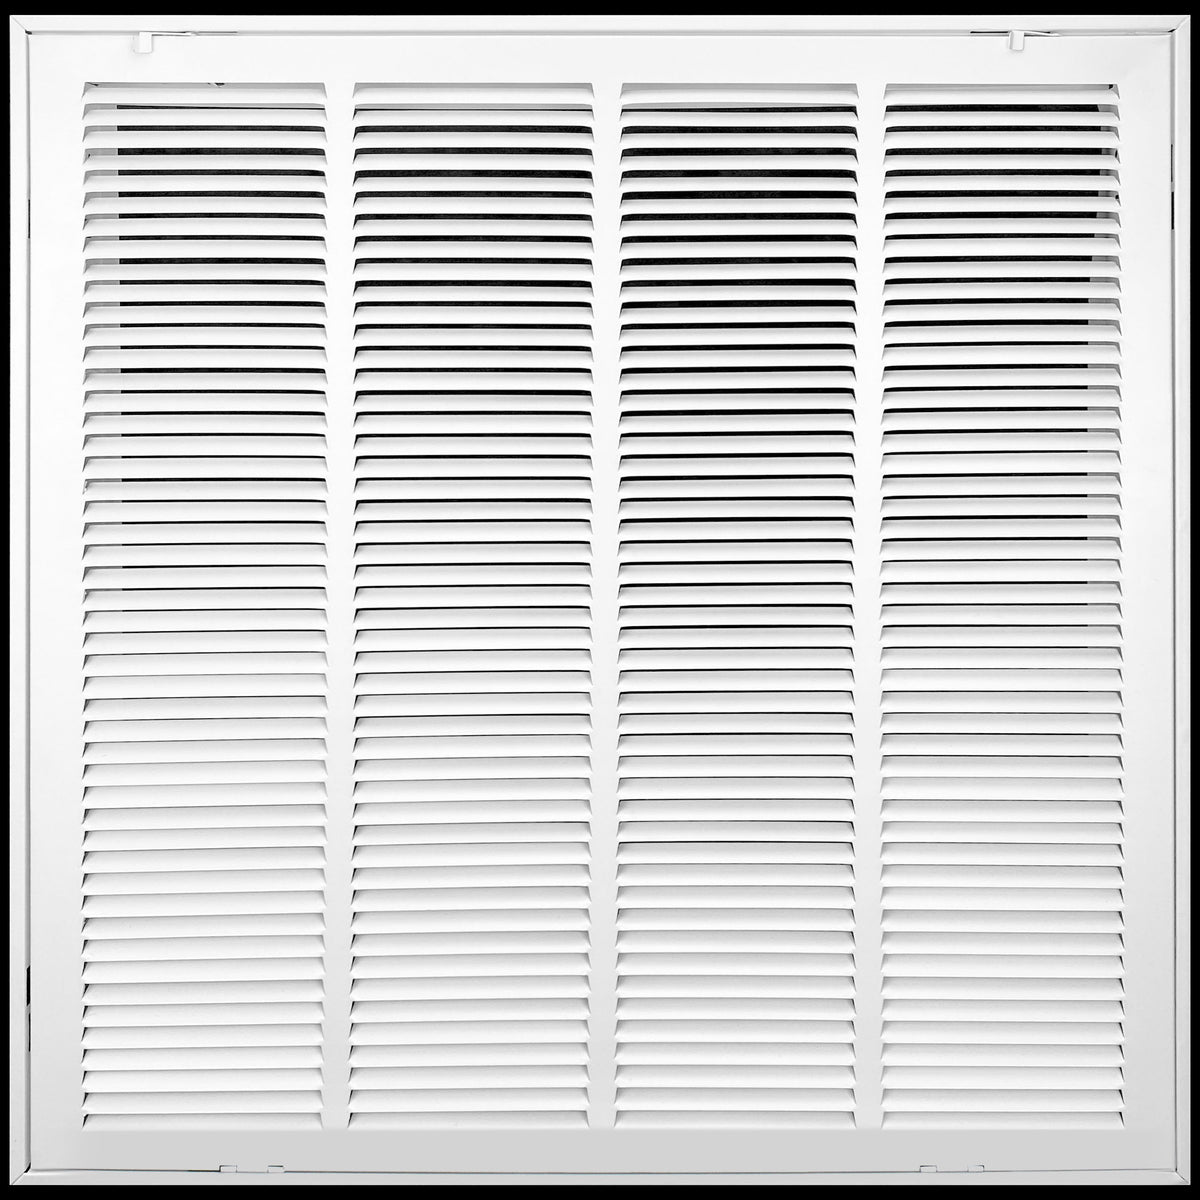 airgrilles 20" x 20" duct opening   steel return air filter grille  fixed hinged  for sidewall and ceiling hnd-fx-1rafg-wh-20x20 752505984520 - 1